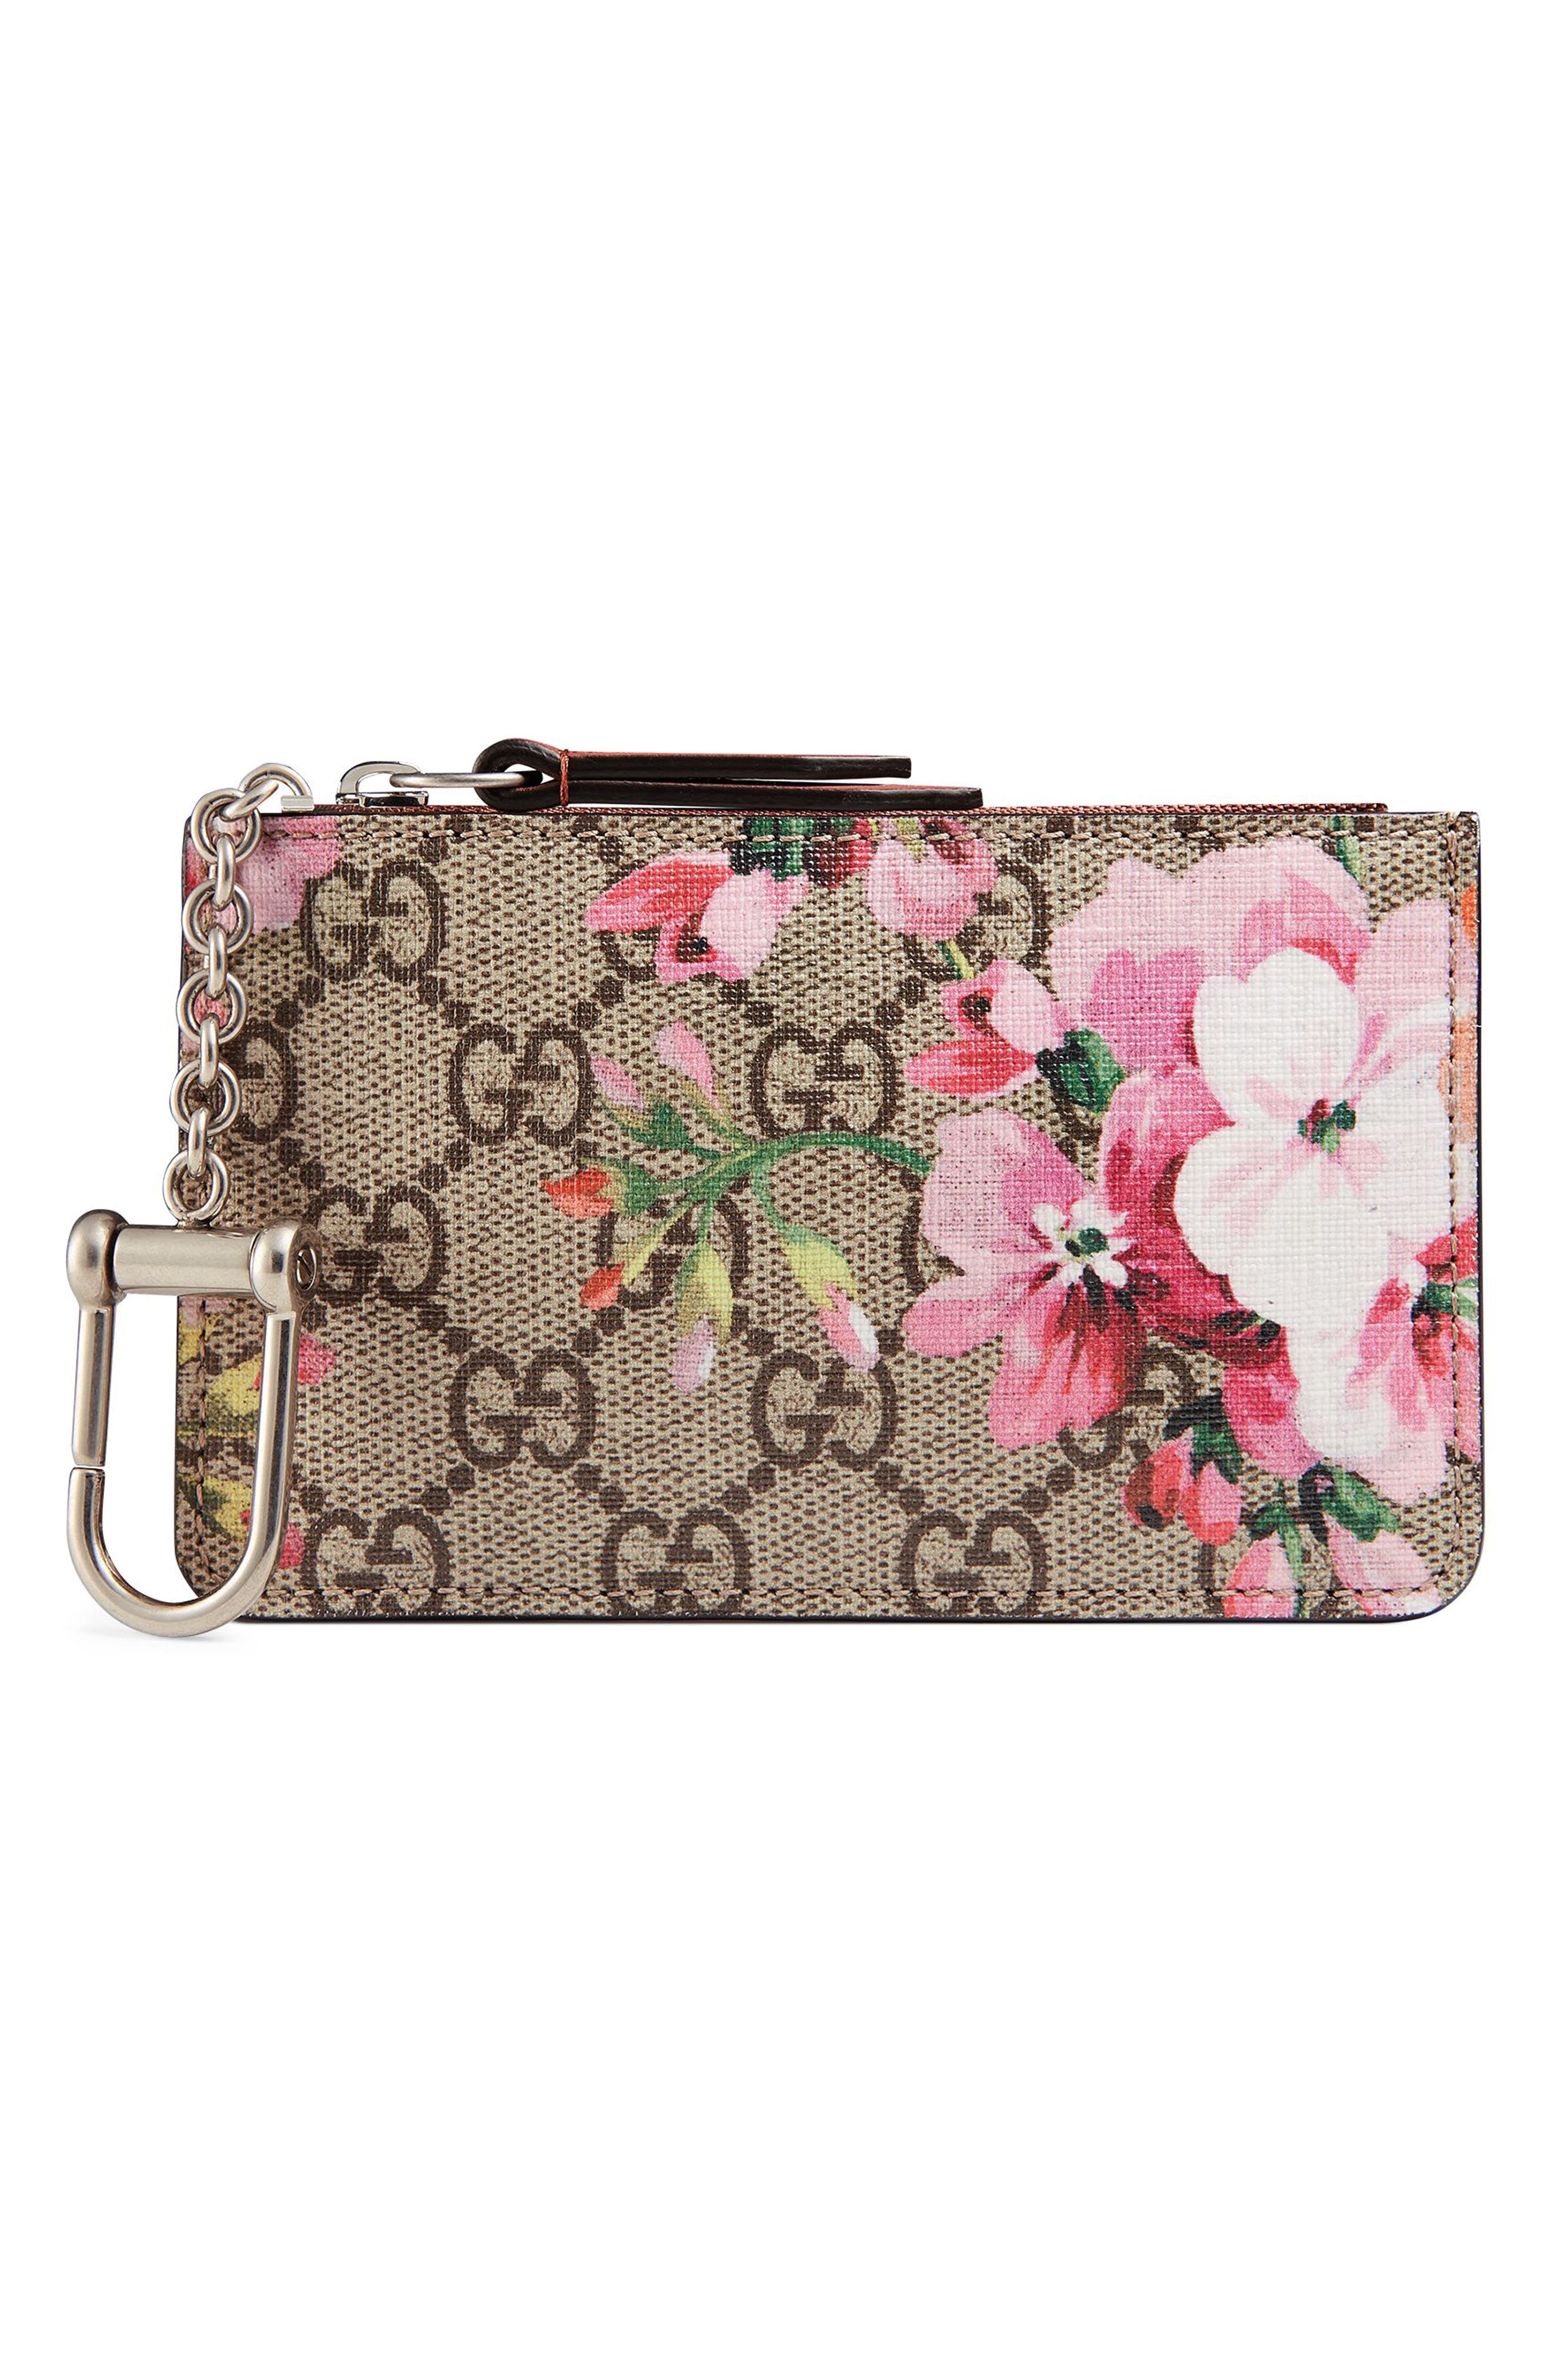 Gucci Blooms Key Case | Nordstrom